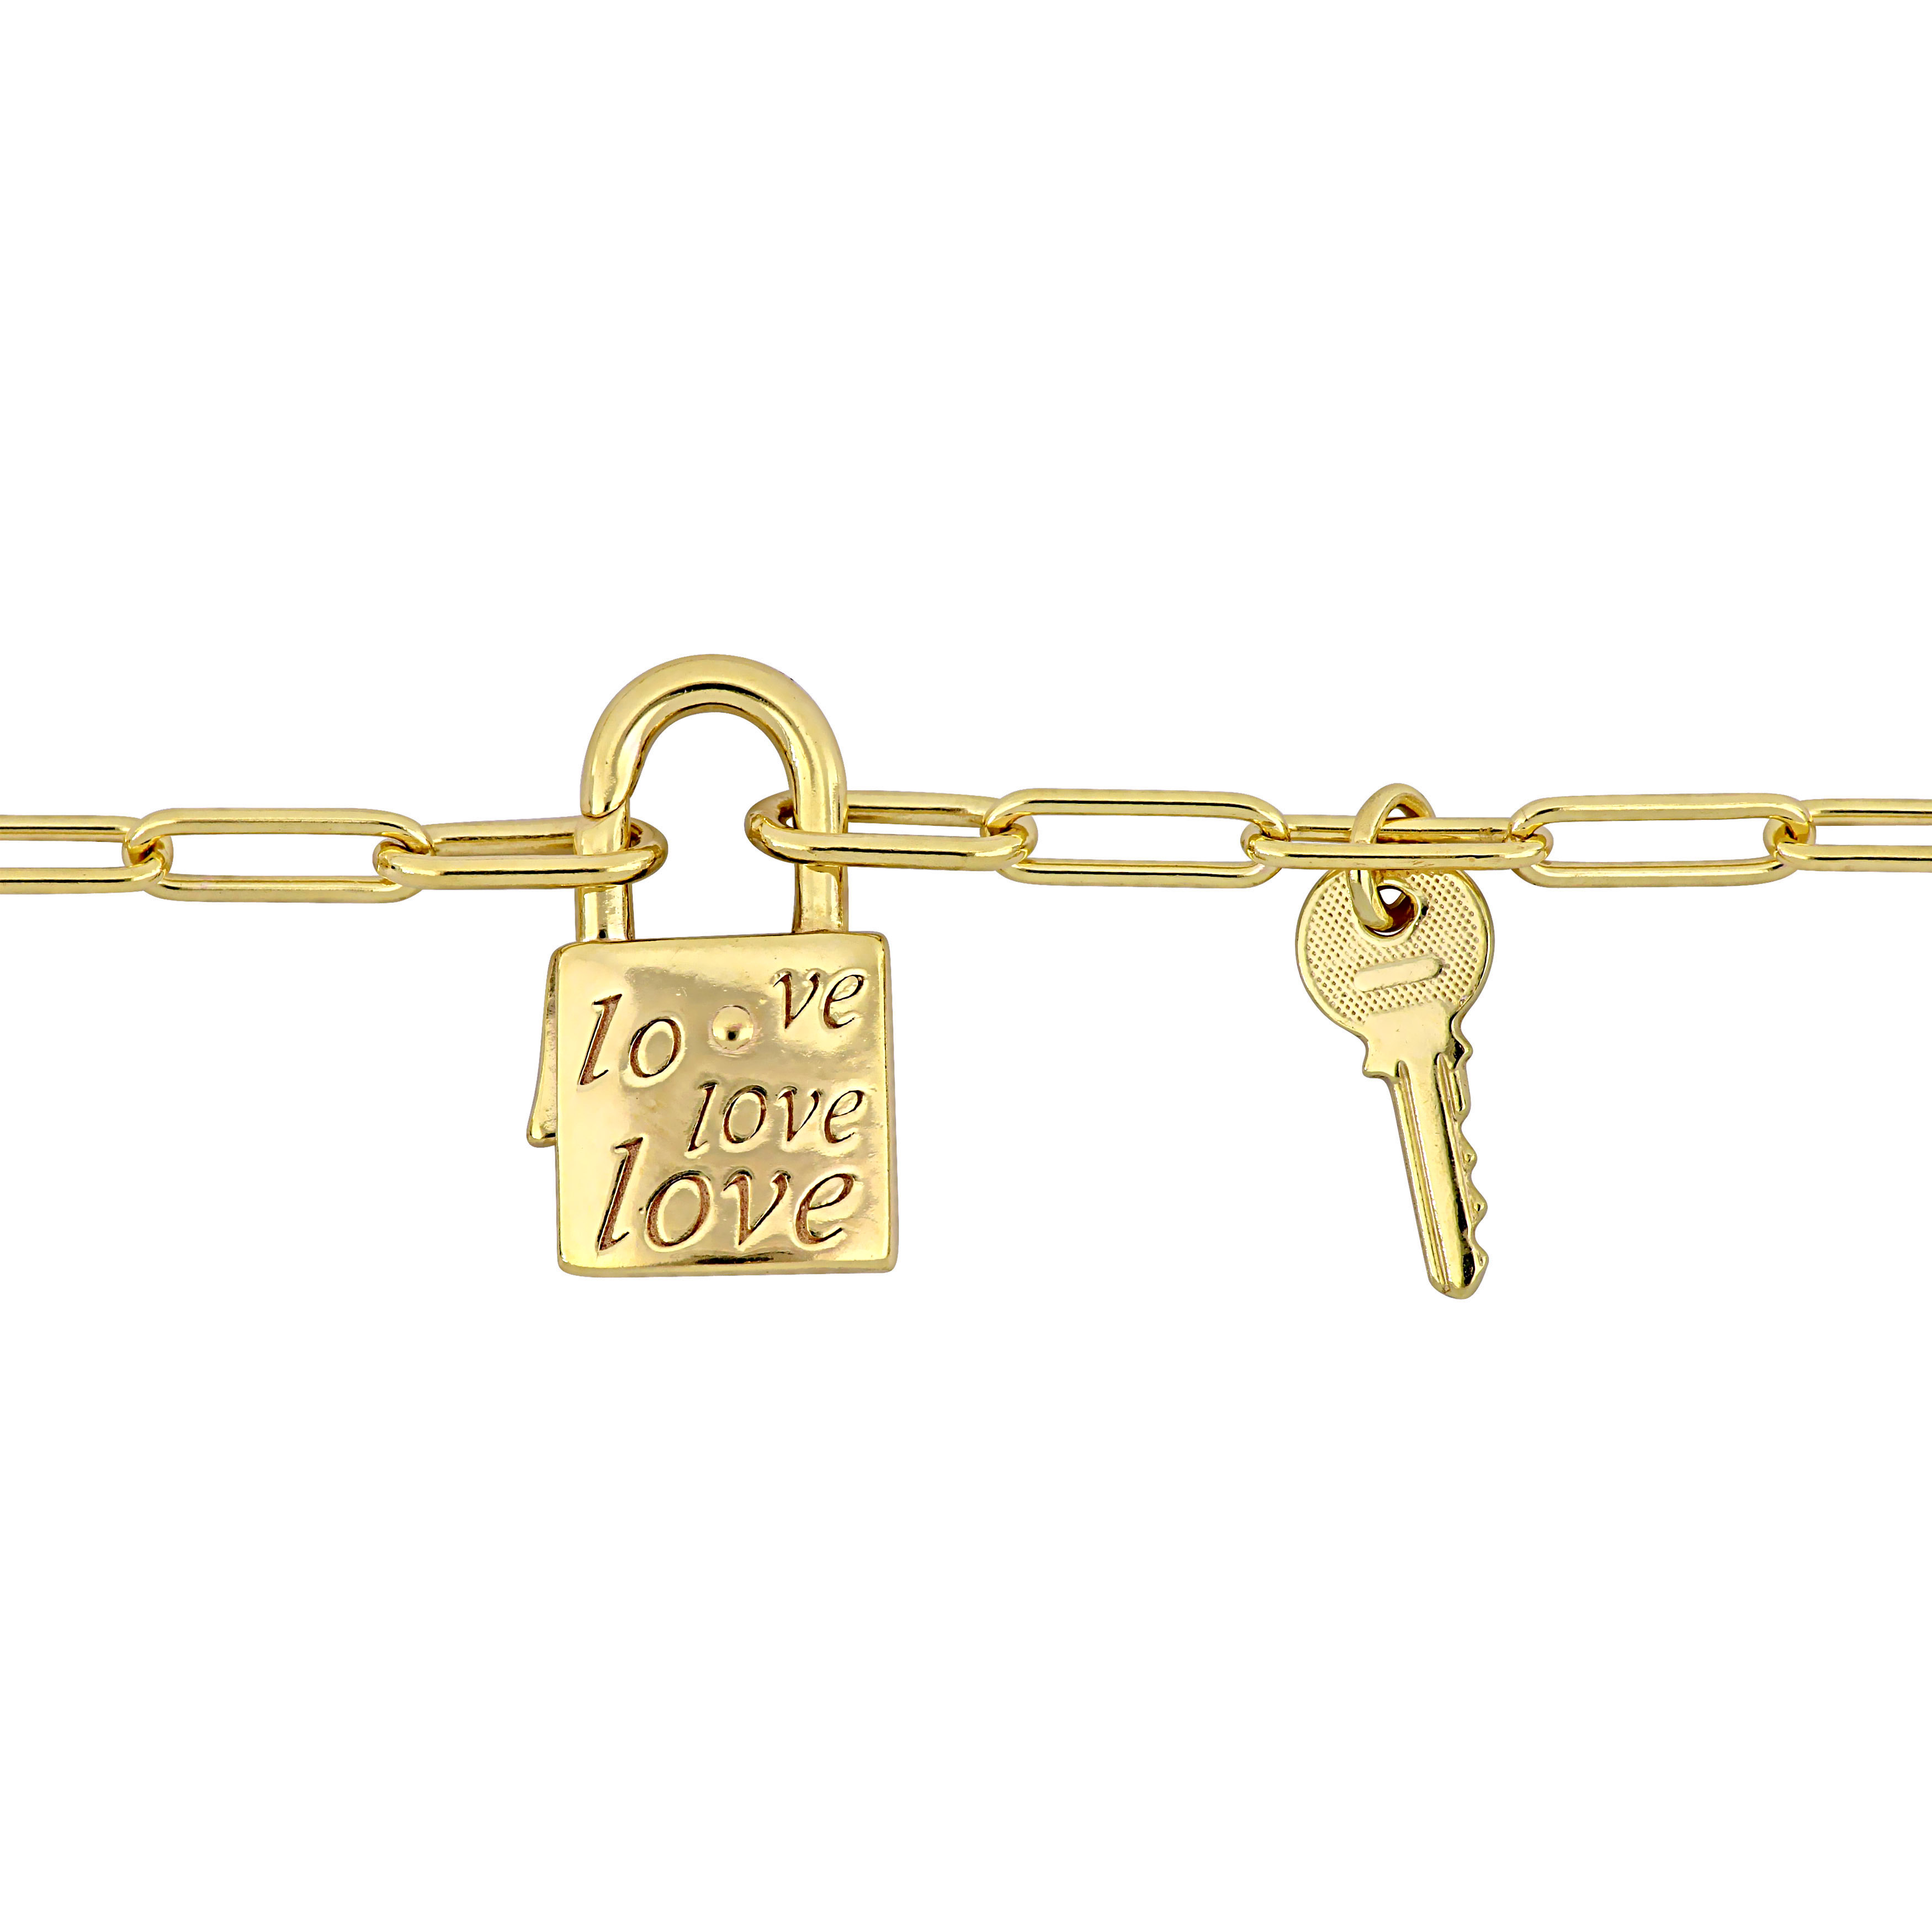 Lock and Key Charm Paper Clip Bracelet in Yellow Plated Sterling Silver - 7.5 in.